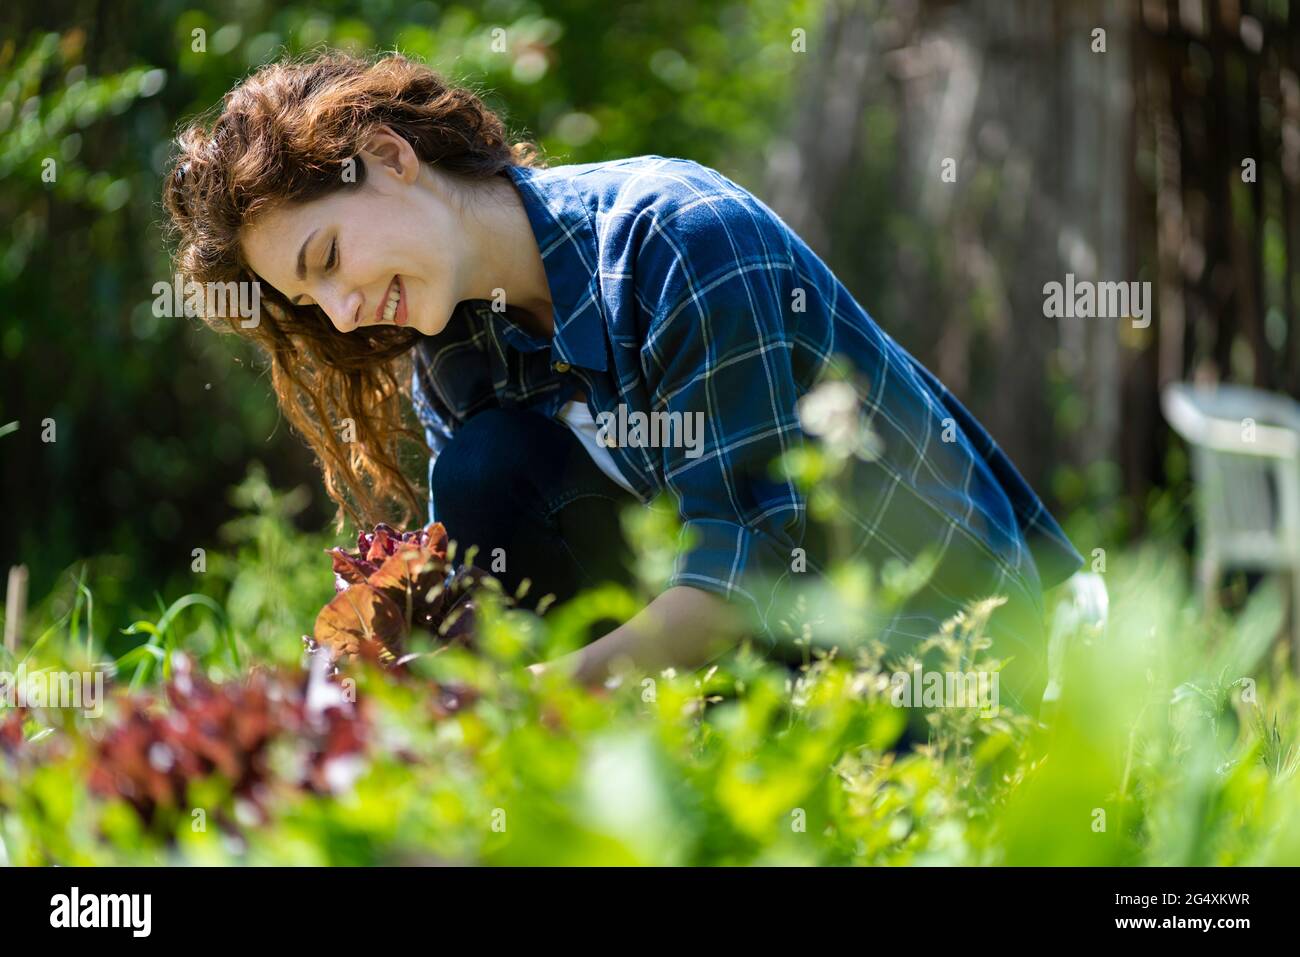 Smiling woman harvesting organic salad leaves in garden Stock Photo